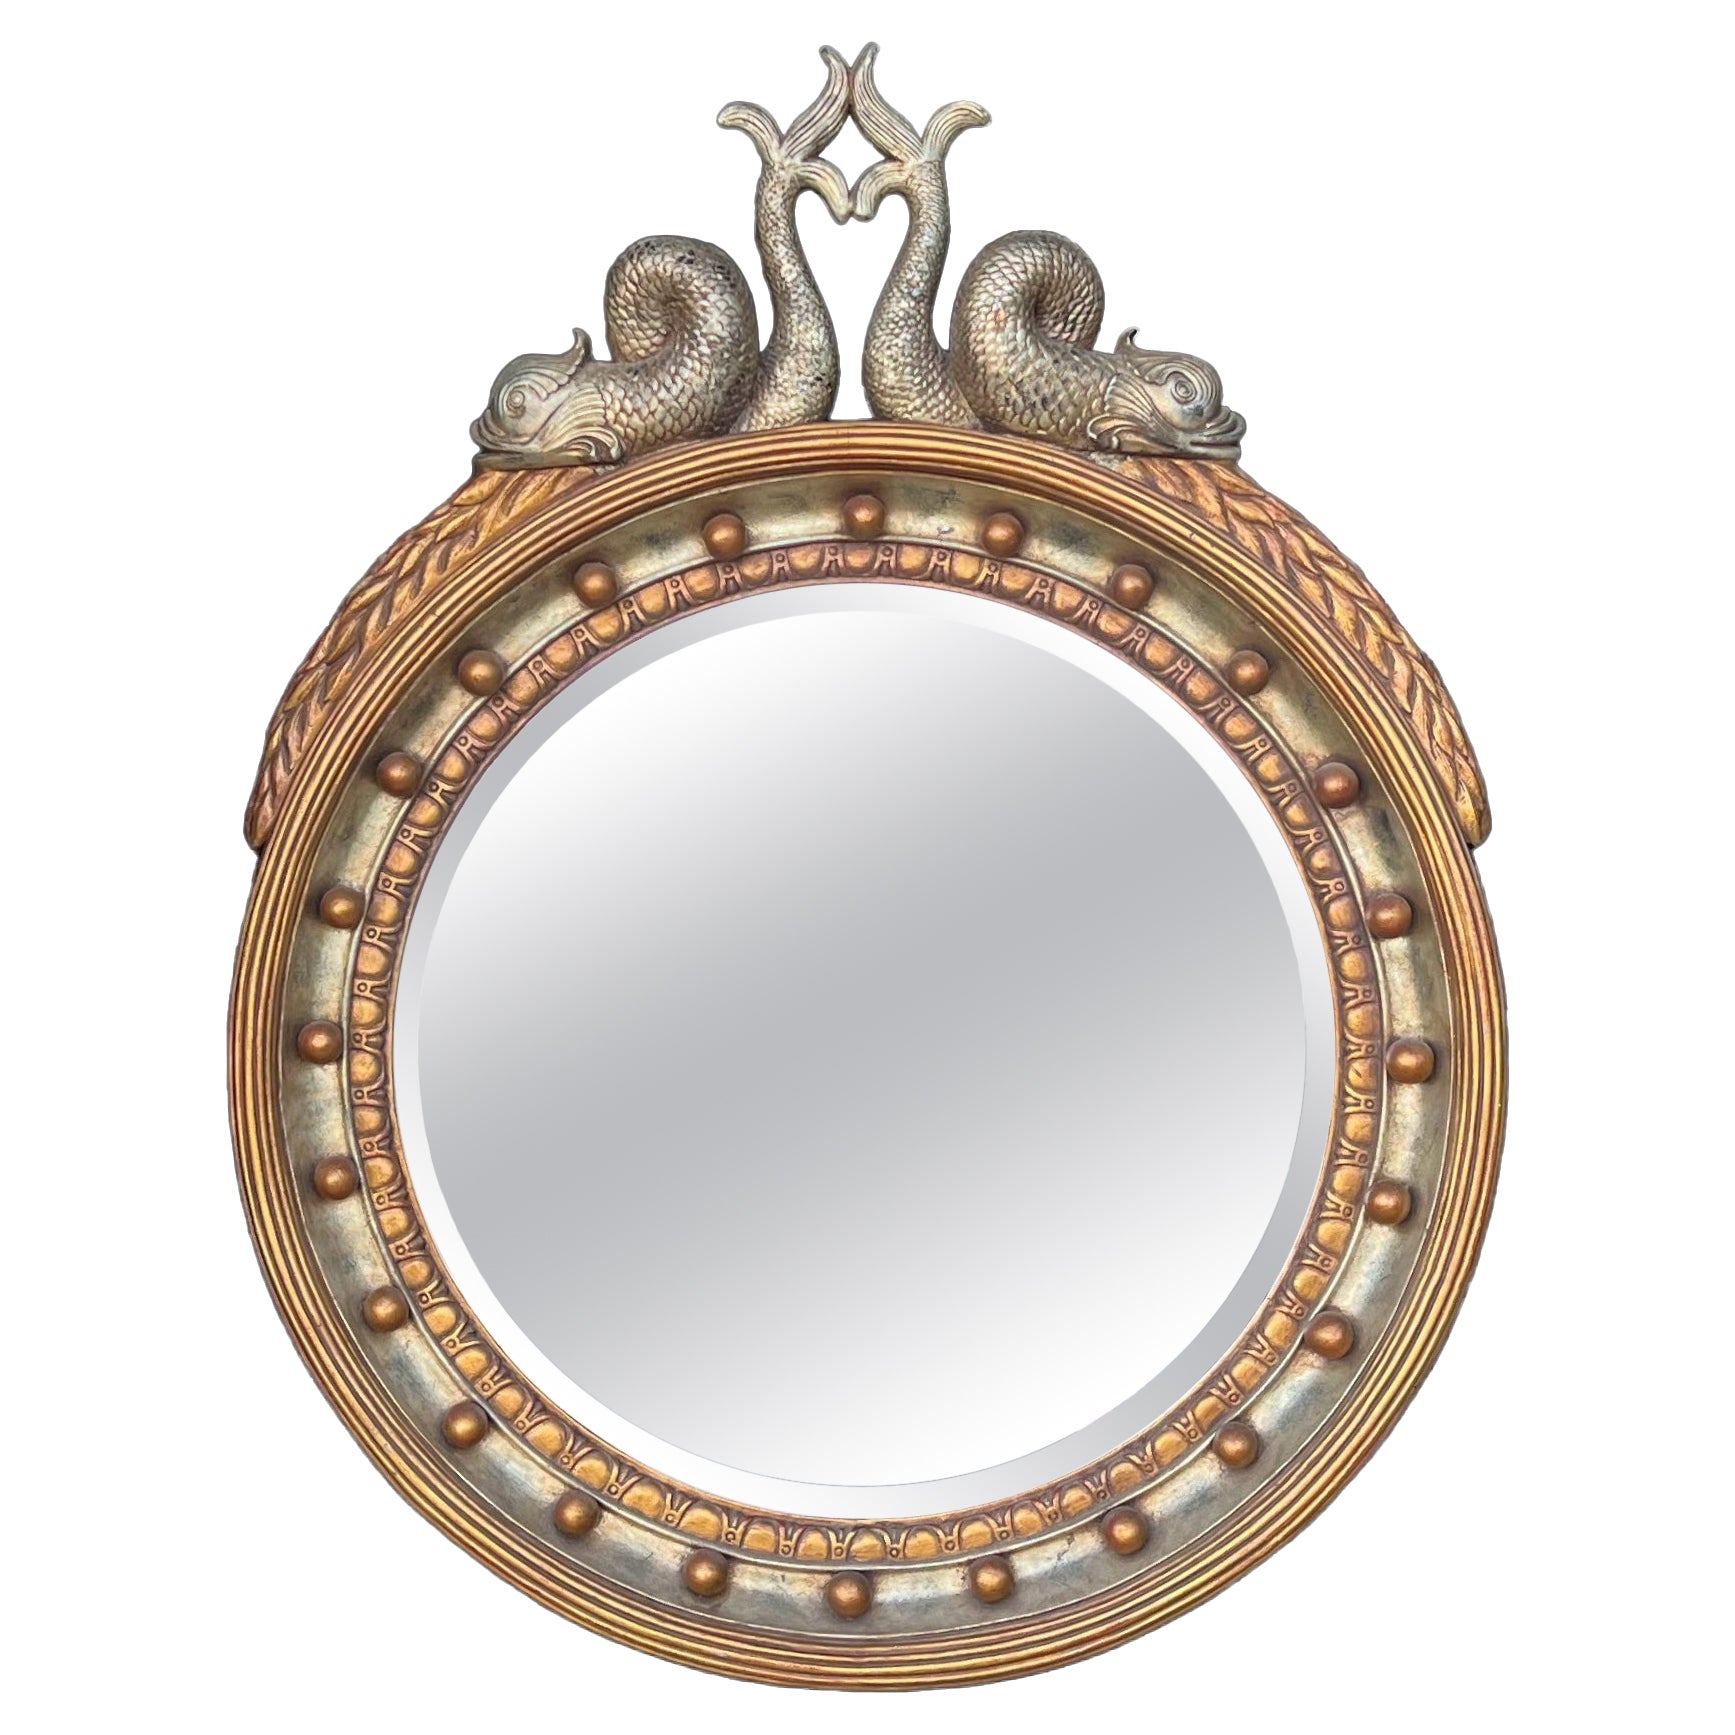 20th-C. Large Scale Neo-Classical & Federal Style Gilded Round Wall Mirror